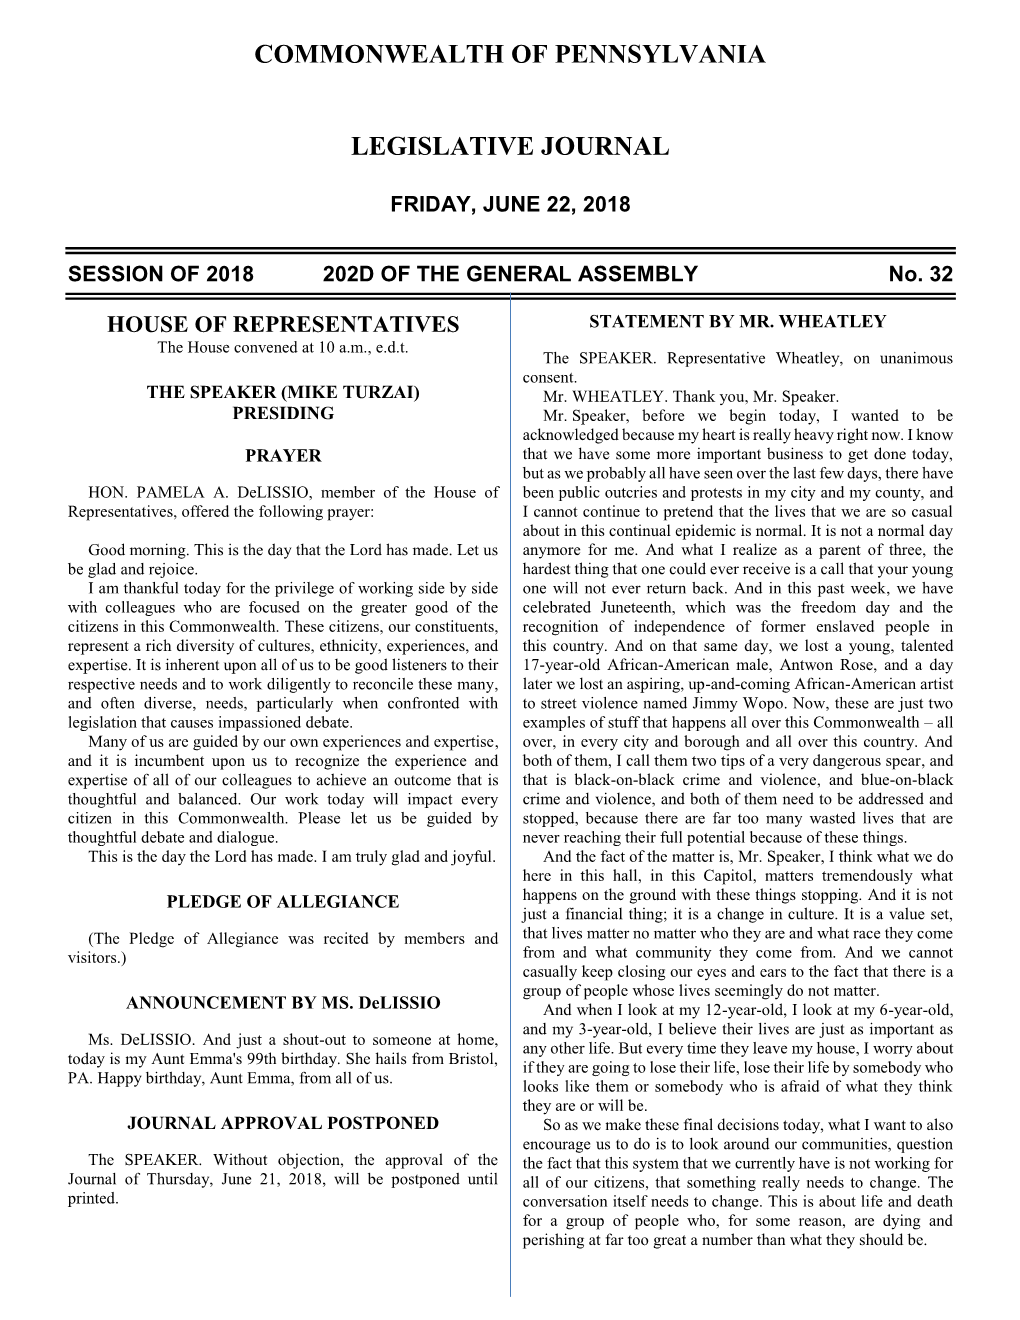 1004, PN 3805, Entitled: YEAS–193 a Resolution Recognizing July 12, 2018, As "Summer Learning Day" Barbin Emrick Kulik Reed in Pennsylvania